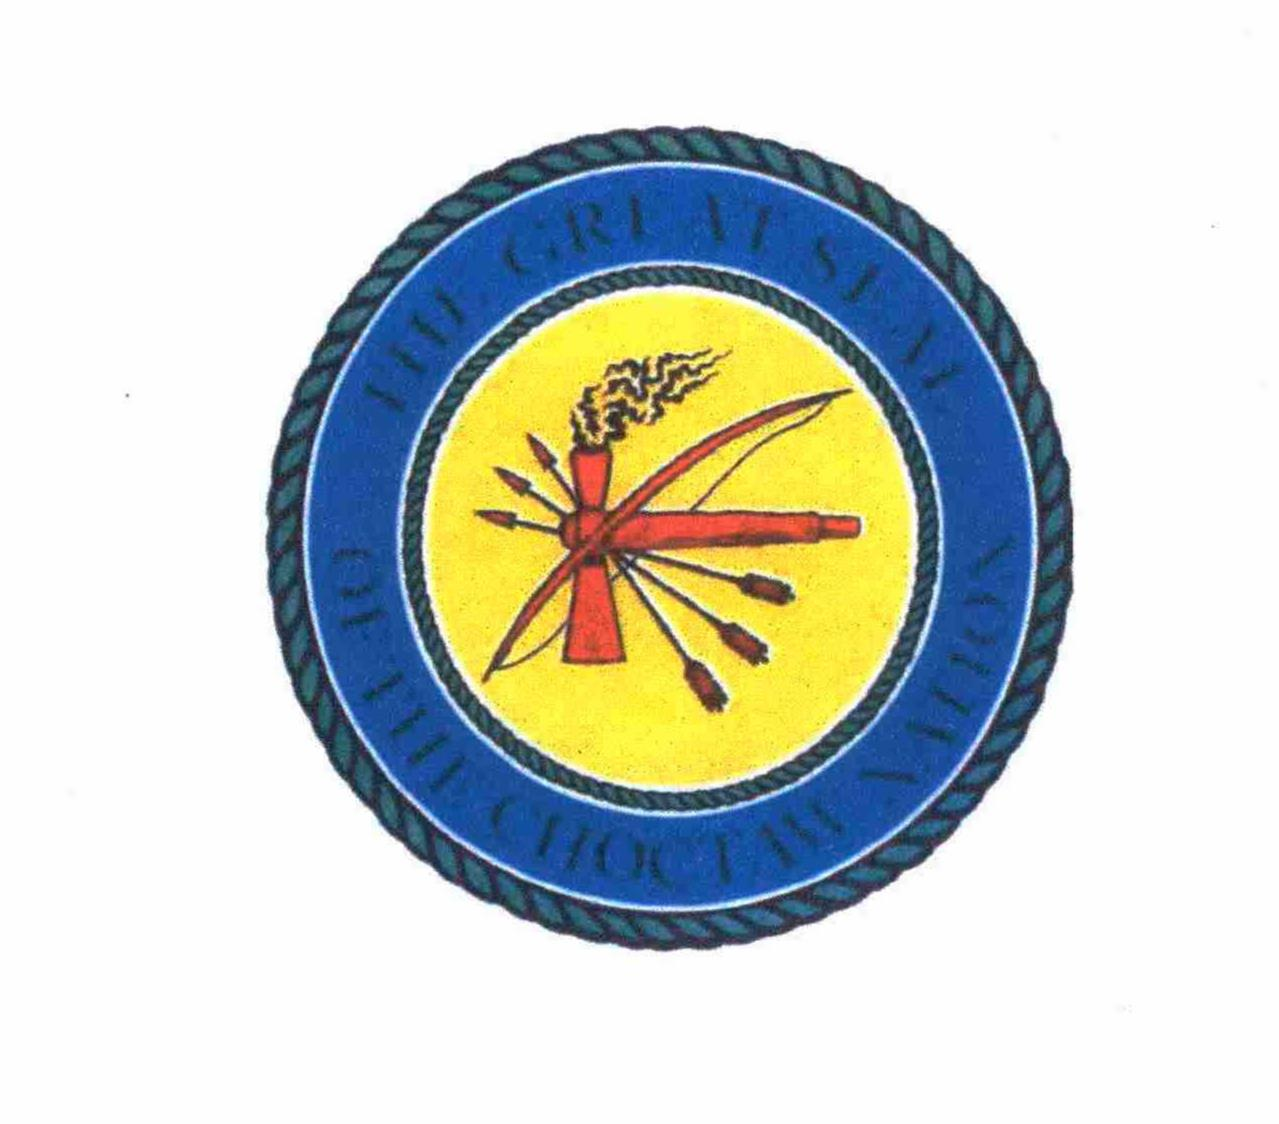 Trademark Logo THE GREAT SEAL OF THE CHOCTAW NATION